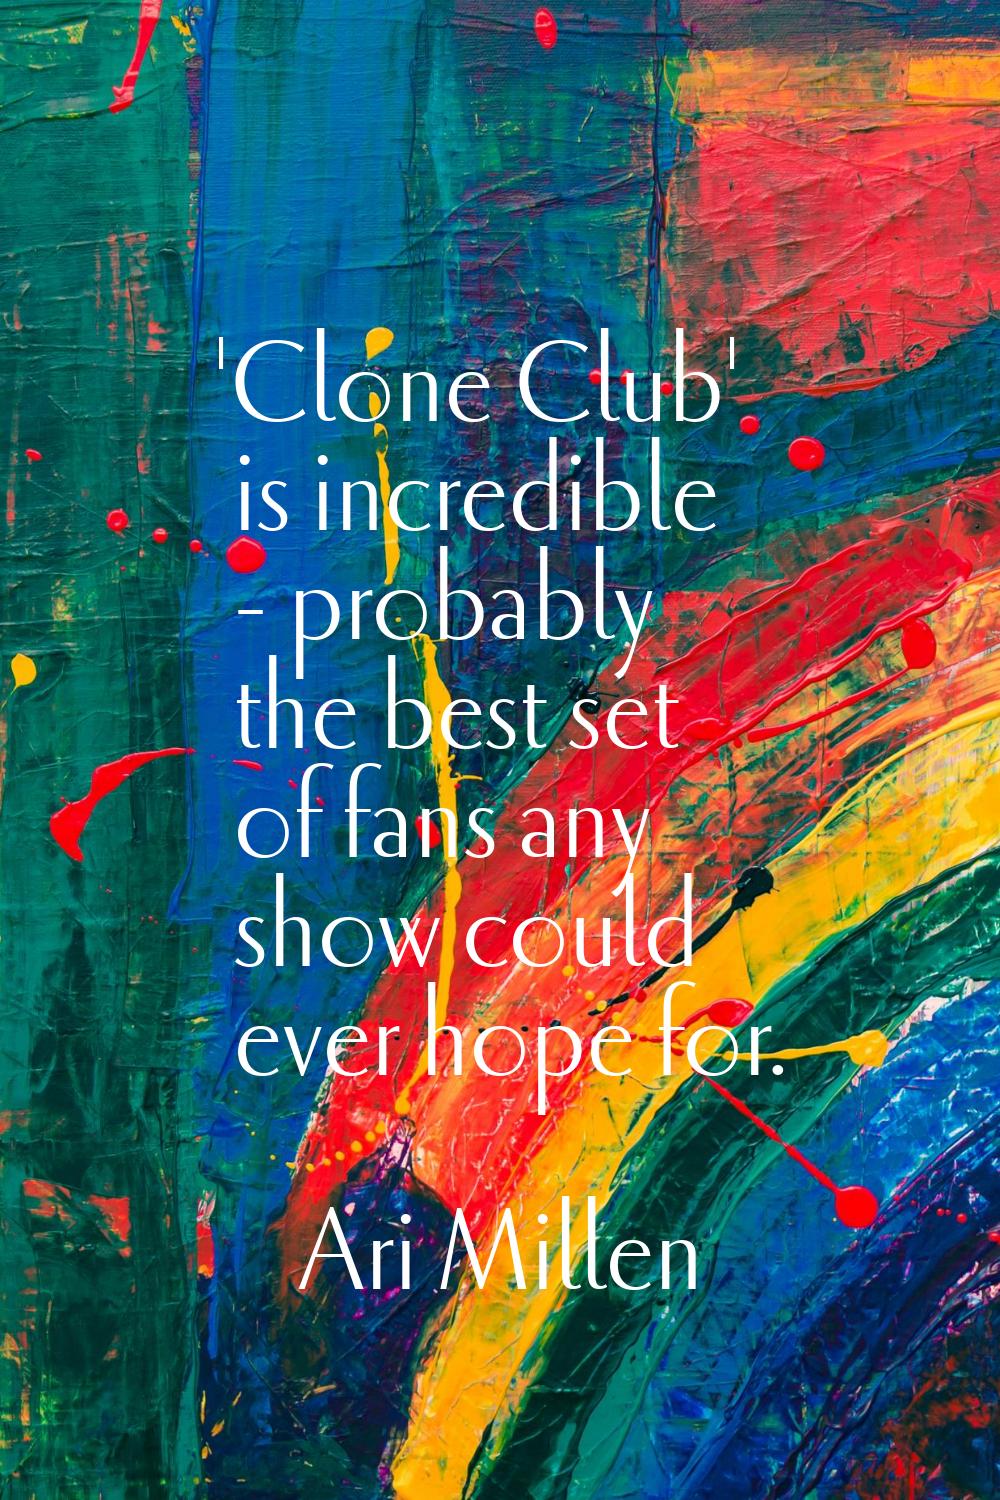 'Clone Club' is incredible - probably the best set of fans any show could ever hope for.